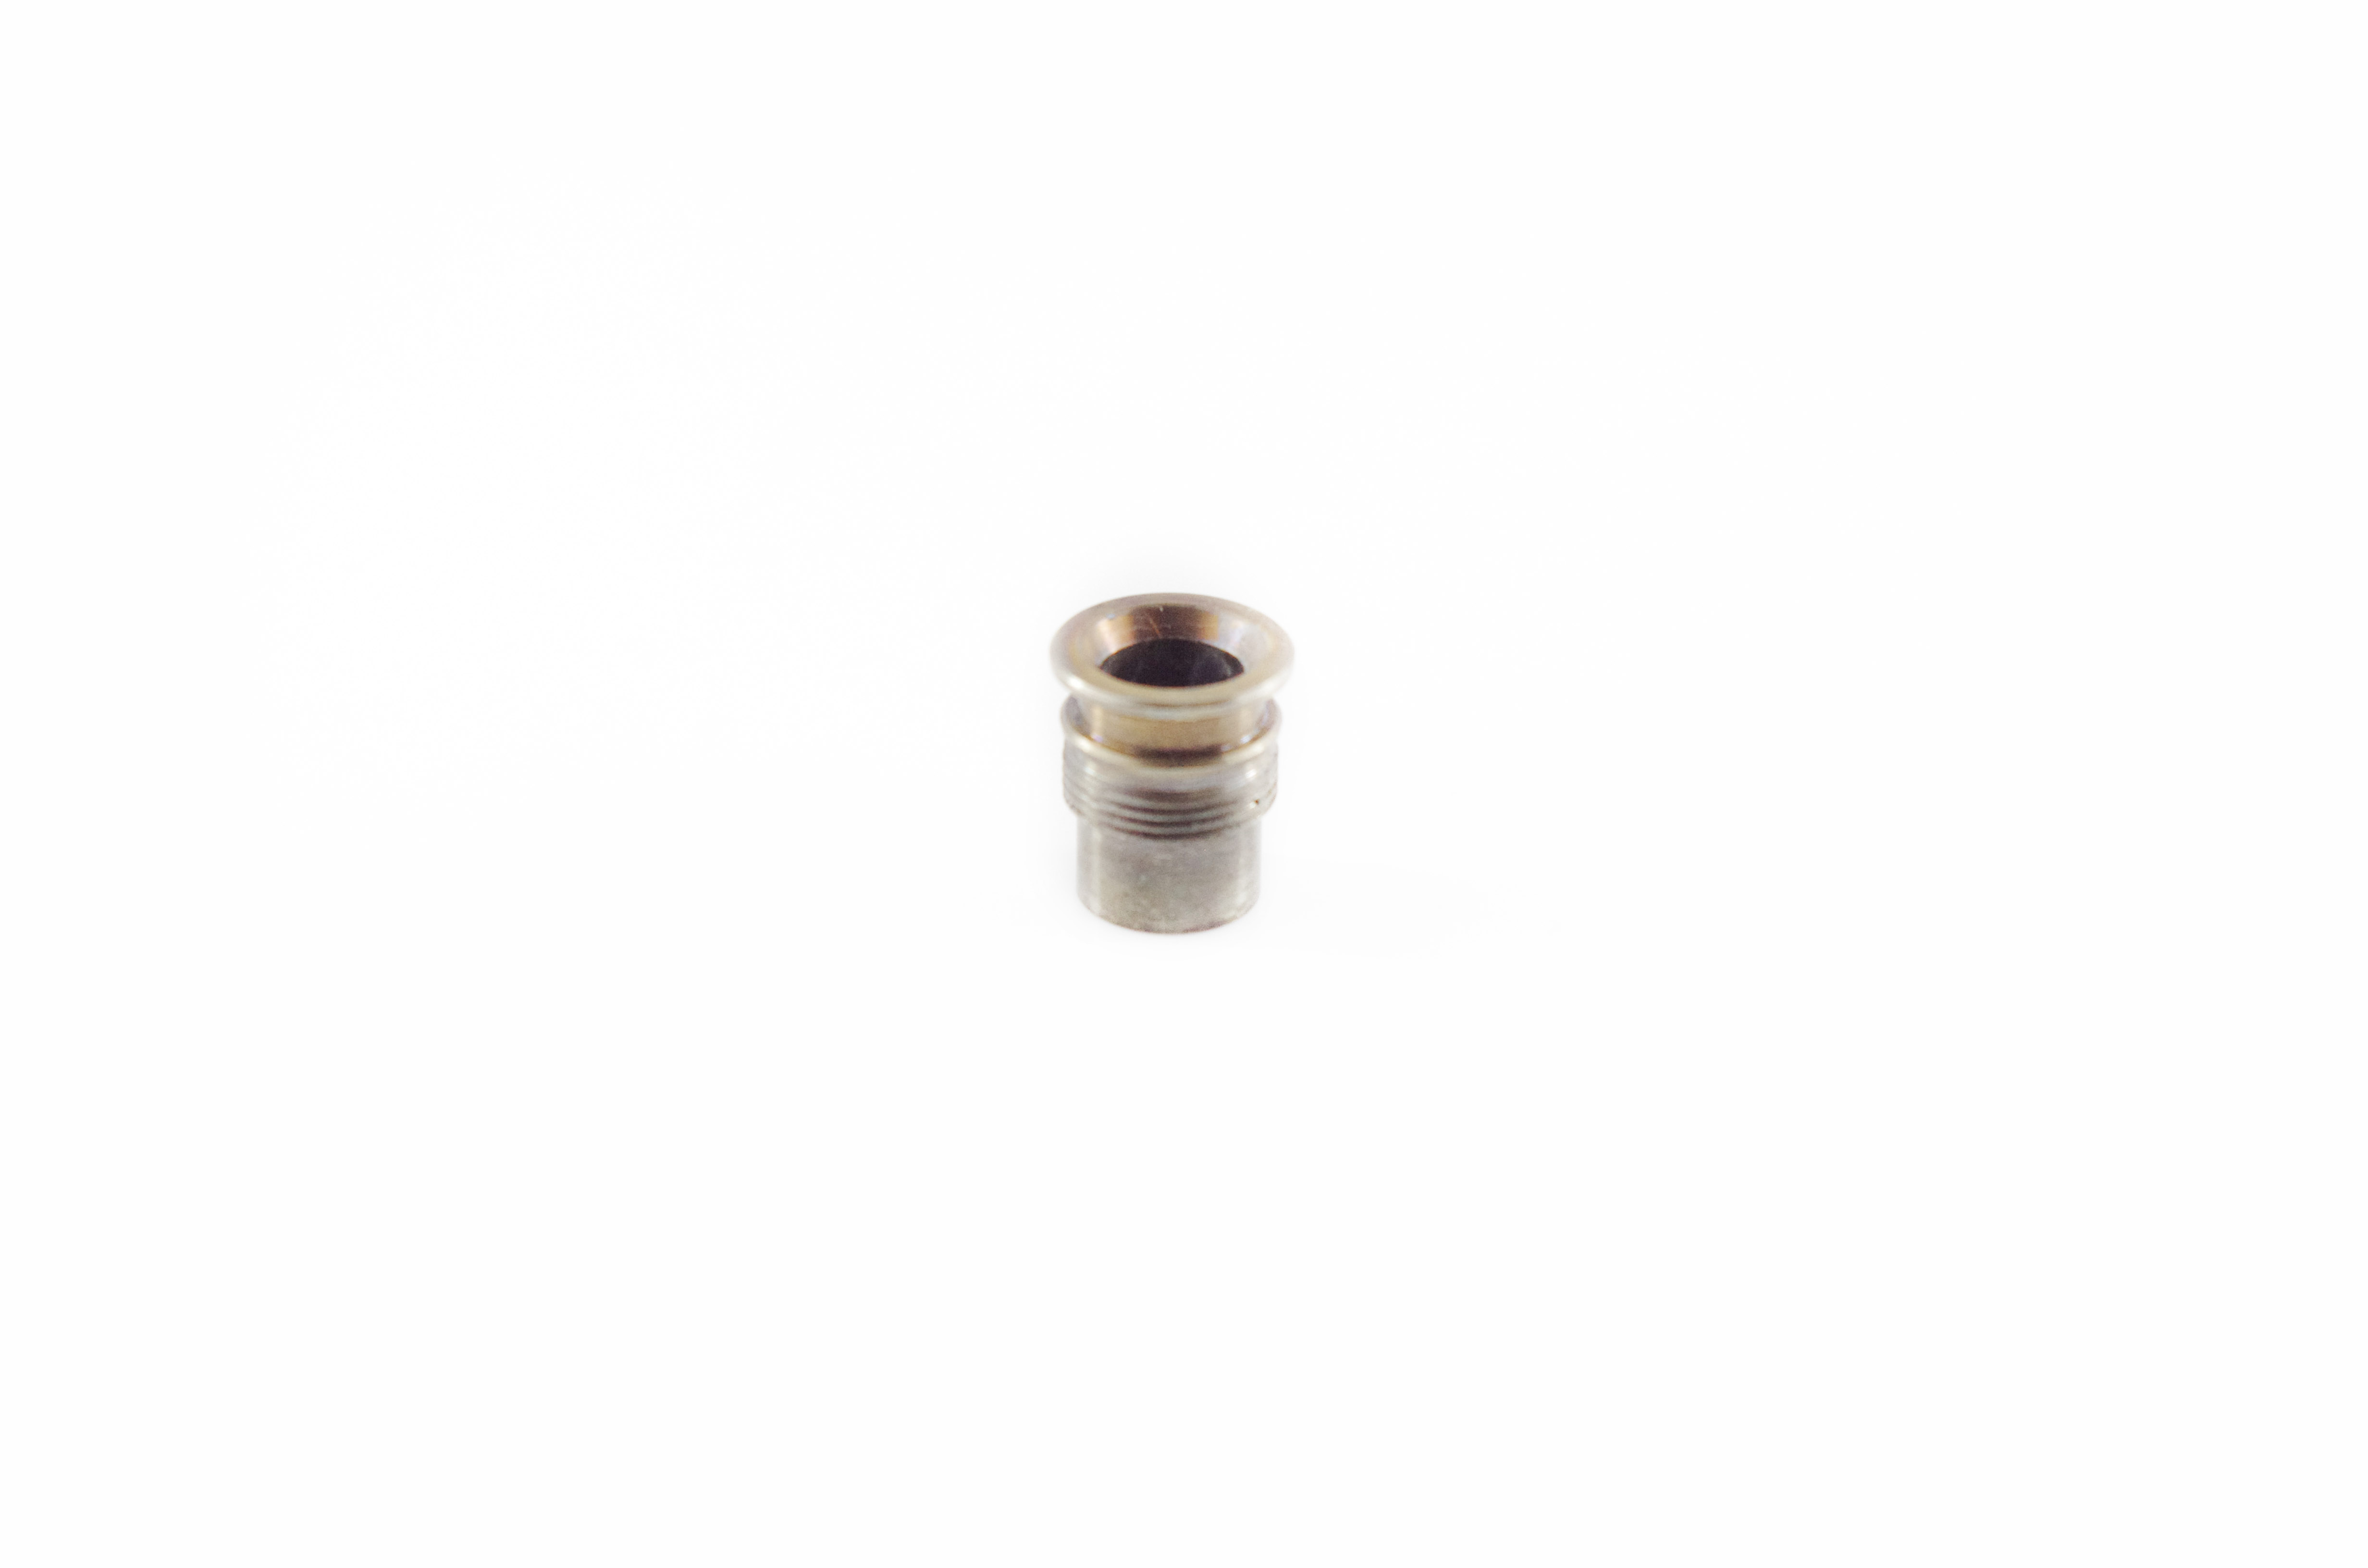 OEM Insertion Tube Proximal End Fitting - BF-1T160, BF-1T180